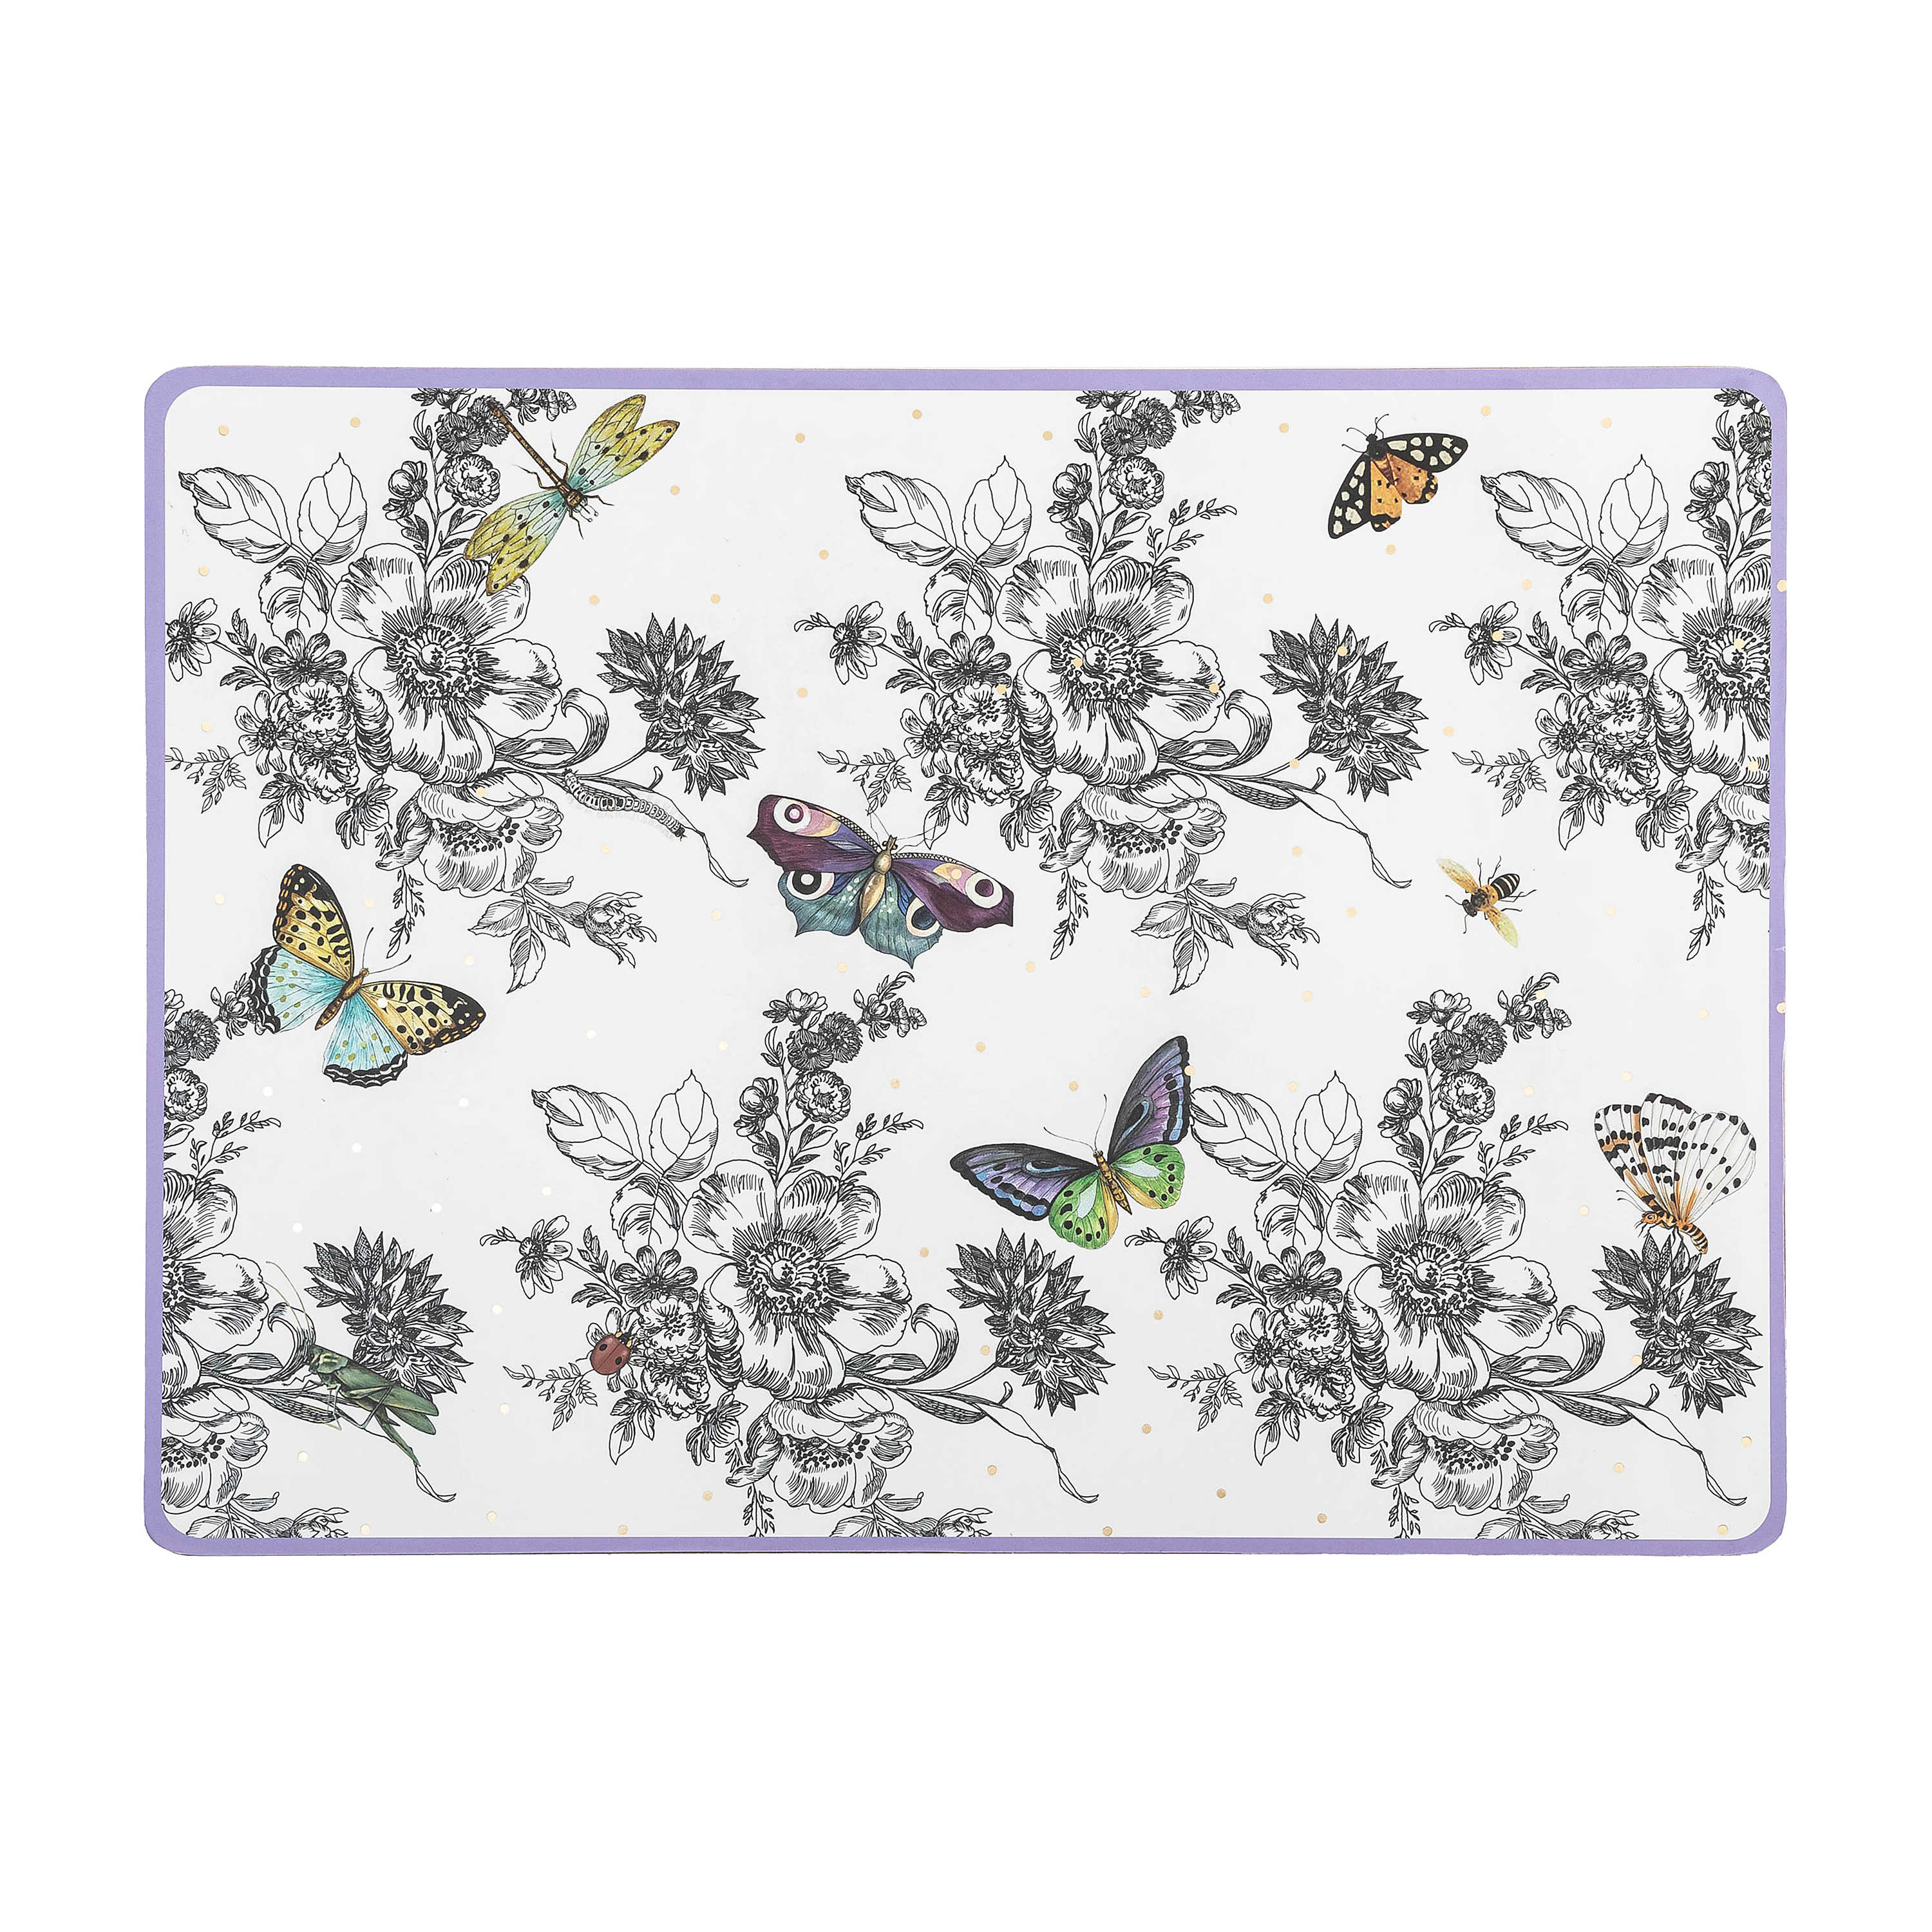 Butterfly Toile Cork Back Placemats, Set of 4 mackenzie-childs Panama 0